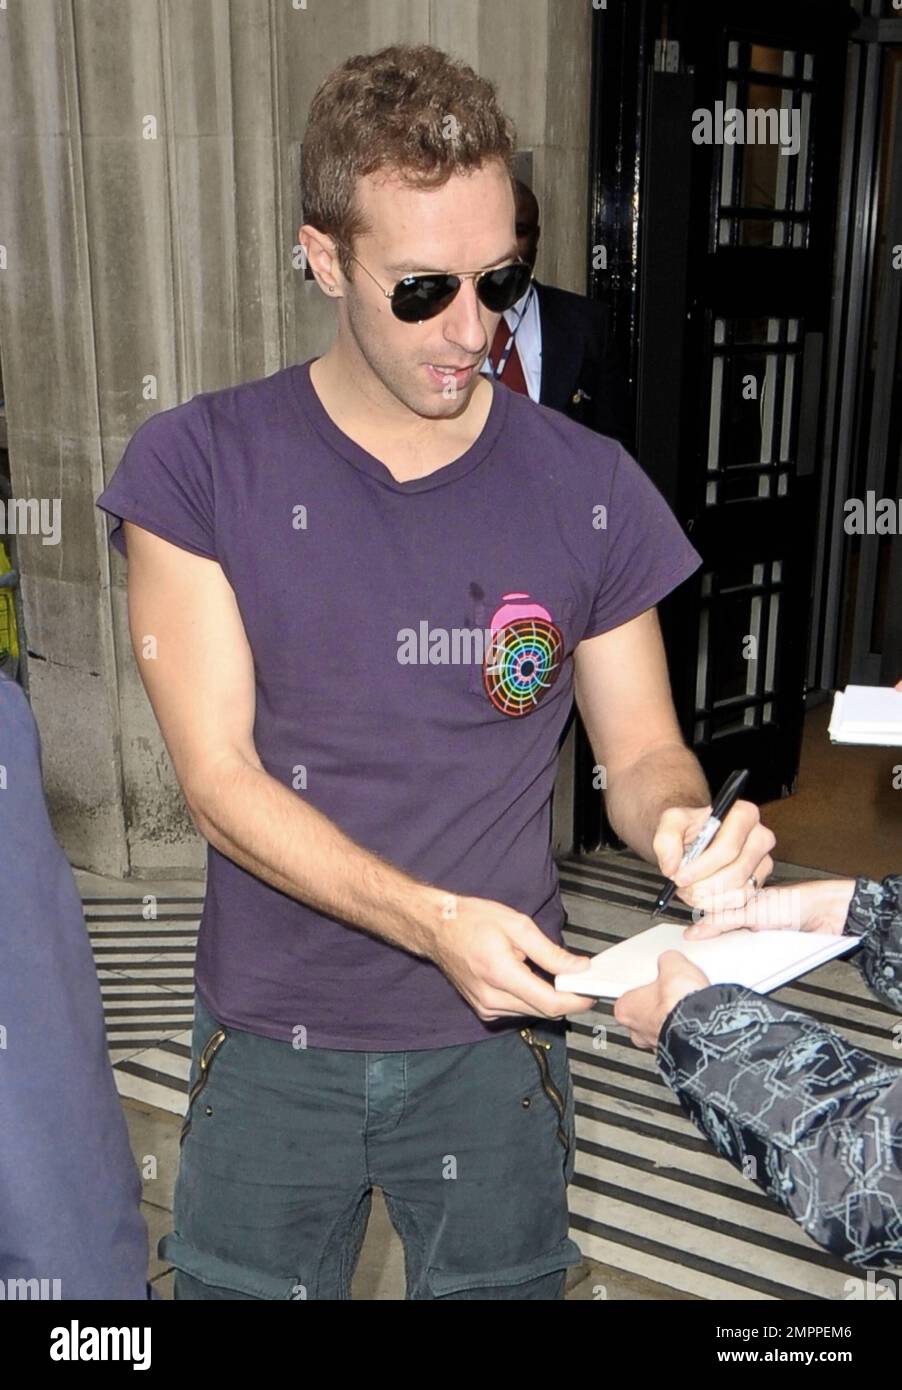 paperback Sprout Korridor Coldplay's" frontman Chris Martin was seen outside of BBC Radio 2 in a  purple t-shirt, grey trousers, white sneakers and sunglasses. Martin made  some time to sign autographs for waiting fans but